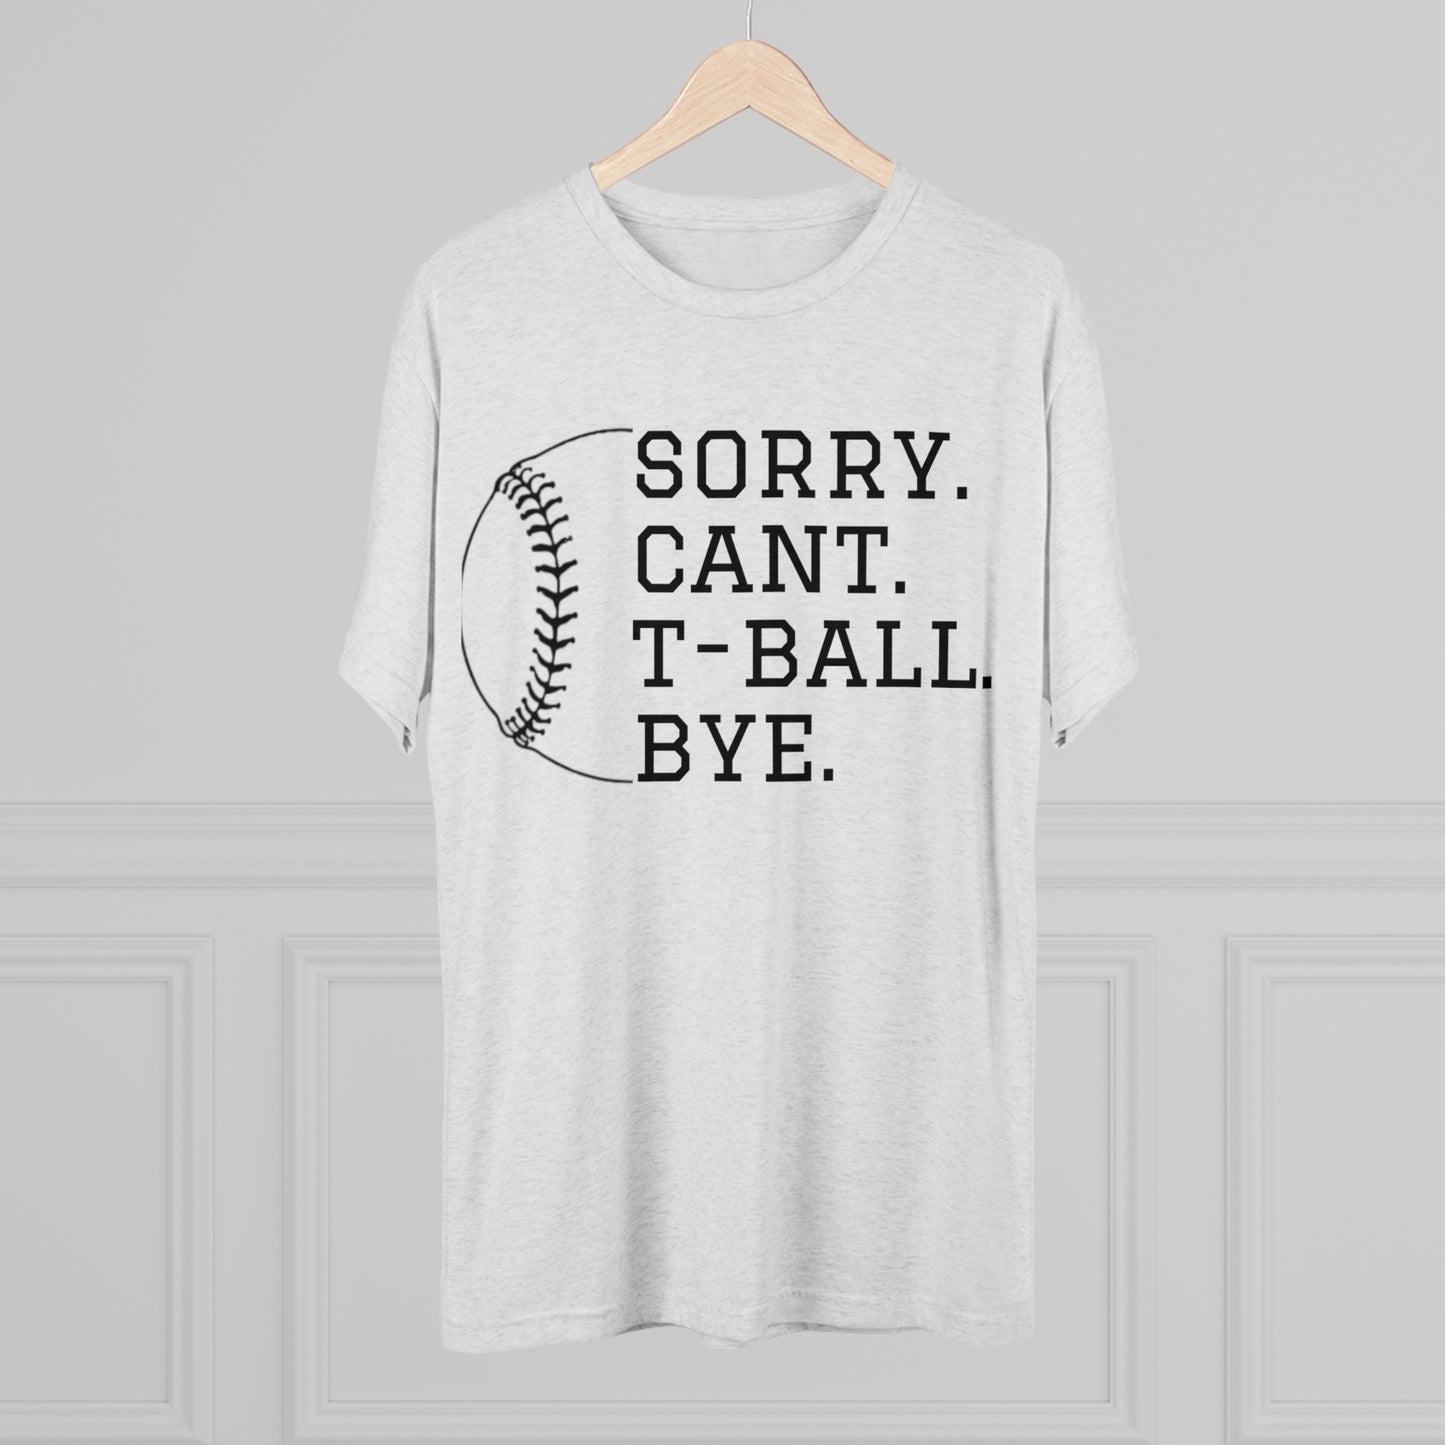 Sorry. Cant. T-ball. Bye. - Baseball Bliss Tri-Blend Tee: Unbelievably Soft Comfort with a Stylish Edge - Perfect for Baseball Enthusiasts!